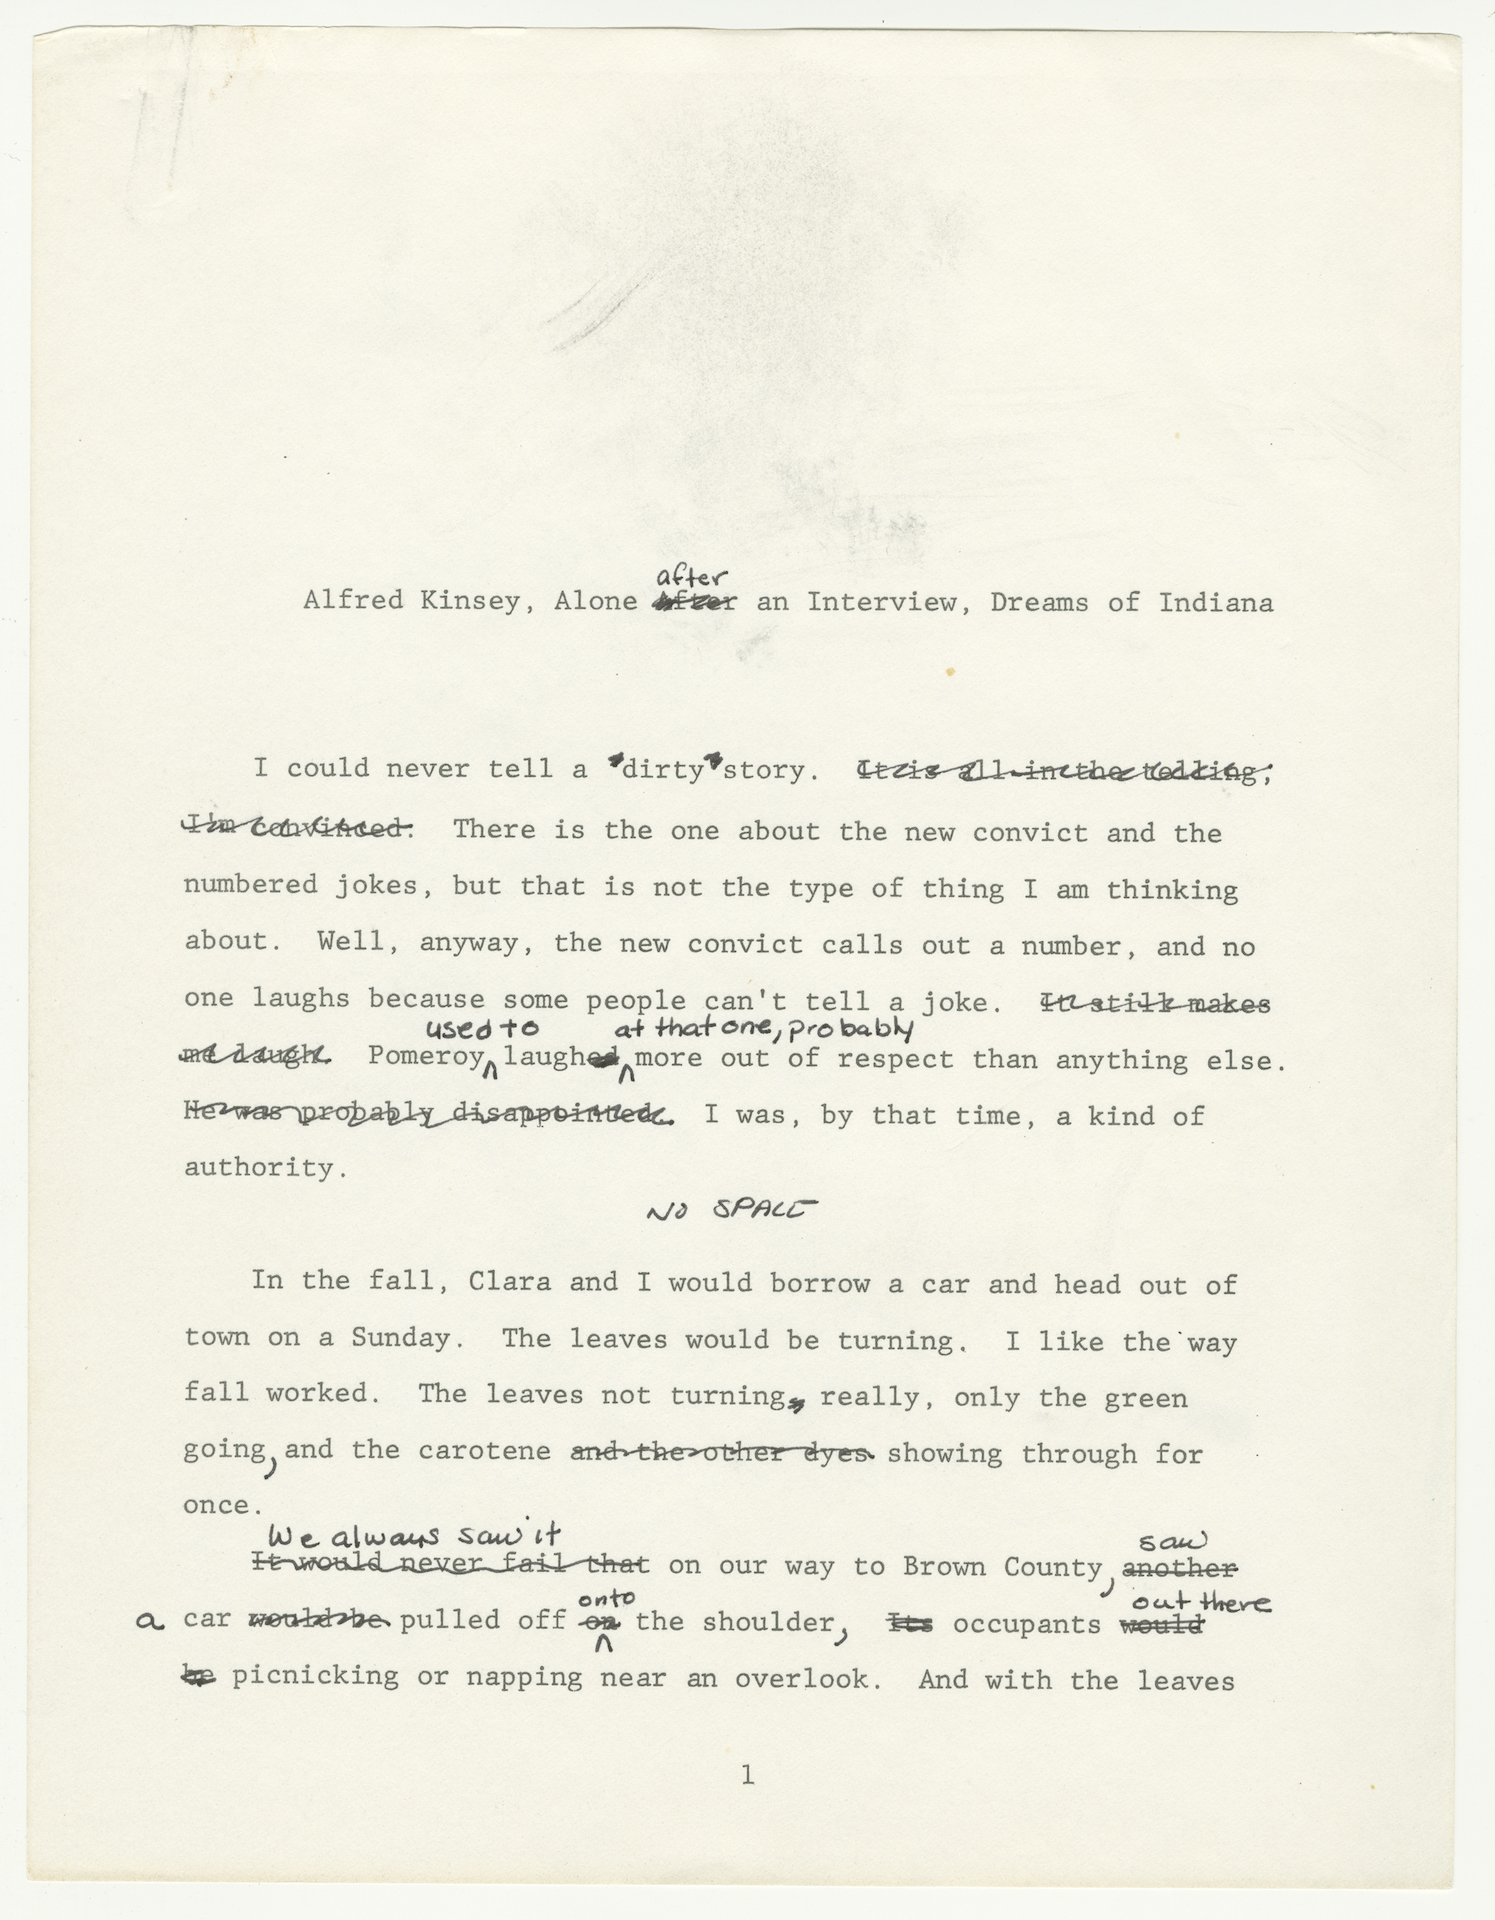 Typescript with holograph corrections of “Alfred Kinsey, Alone After an Interview, Dreams of Indiana.”